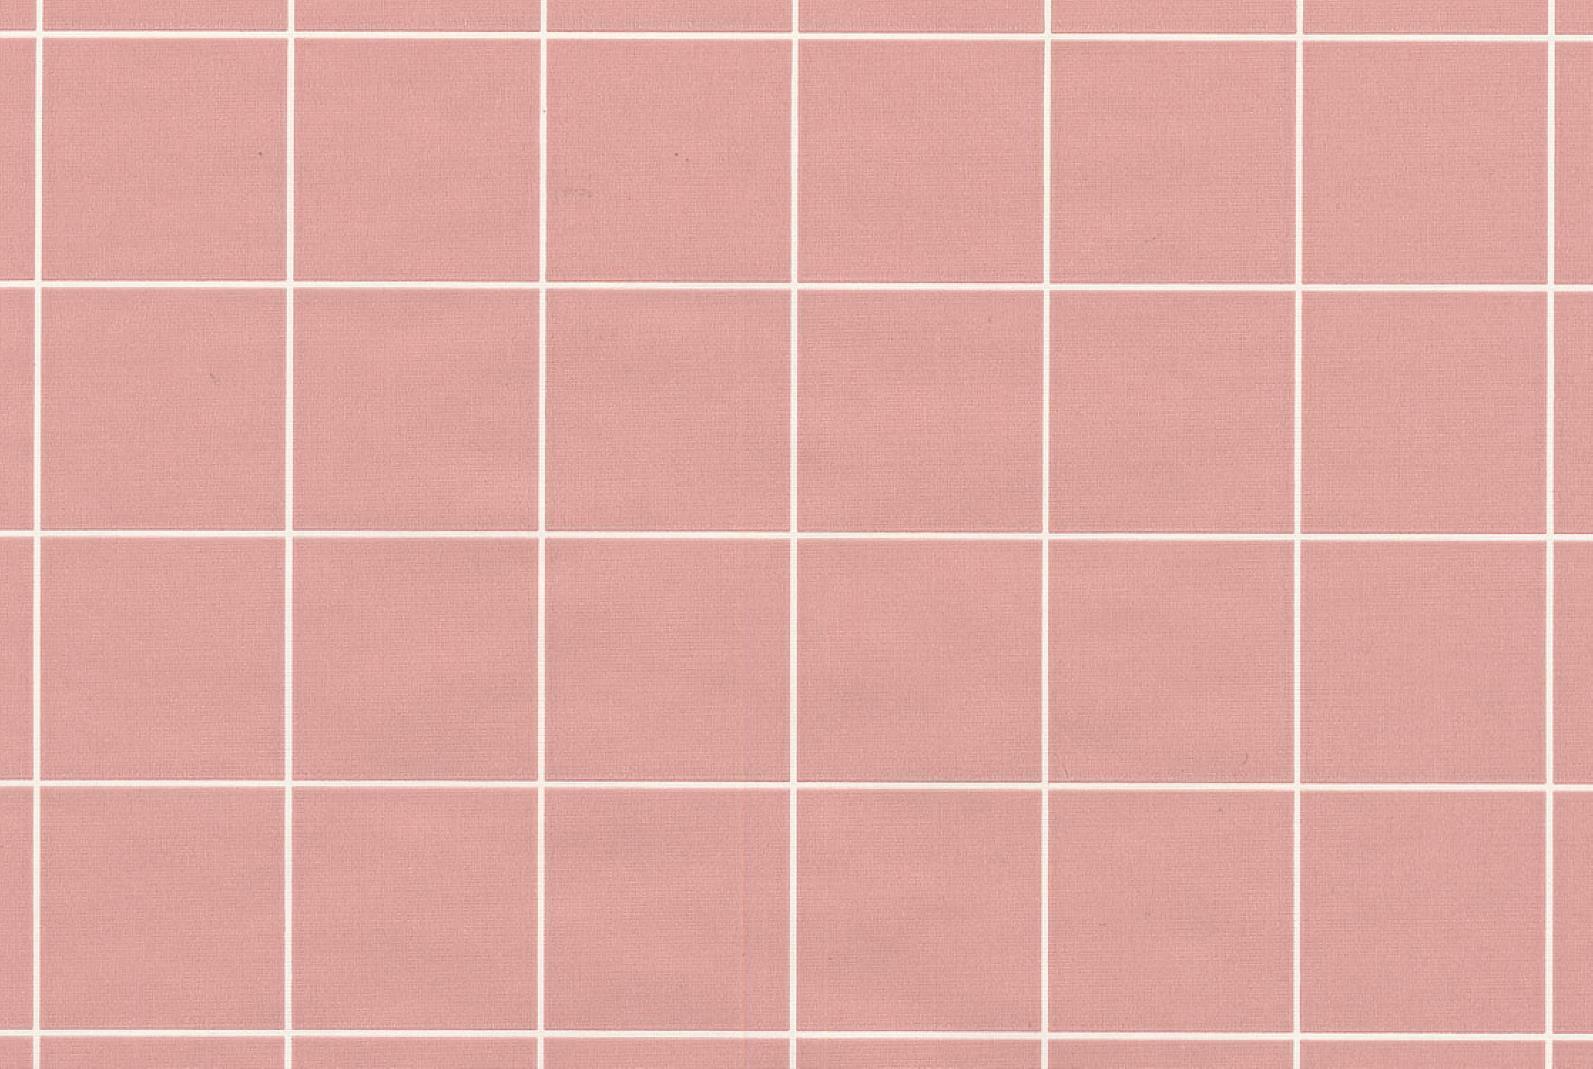 Pink tile background - Checkered